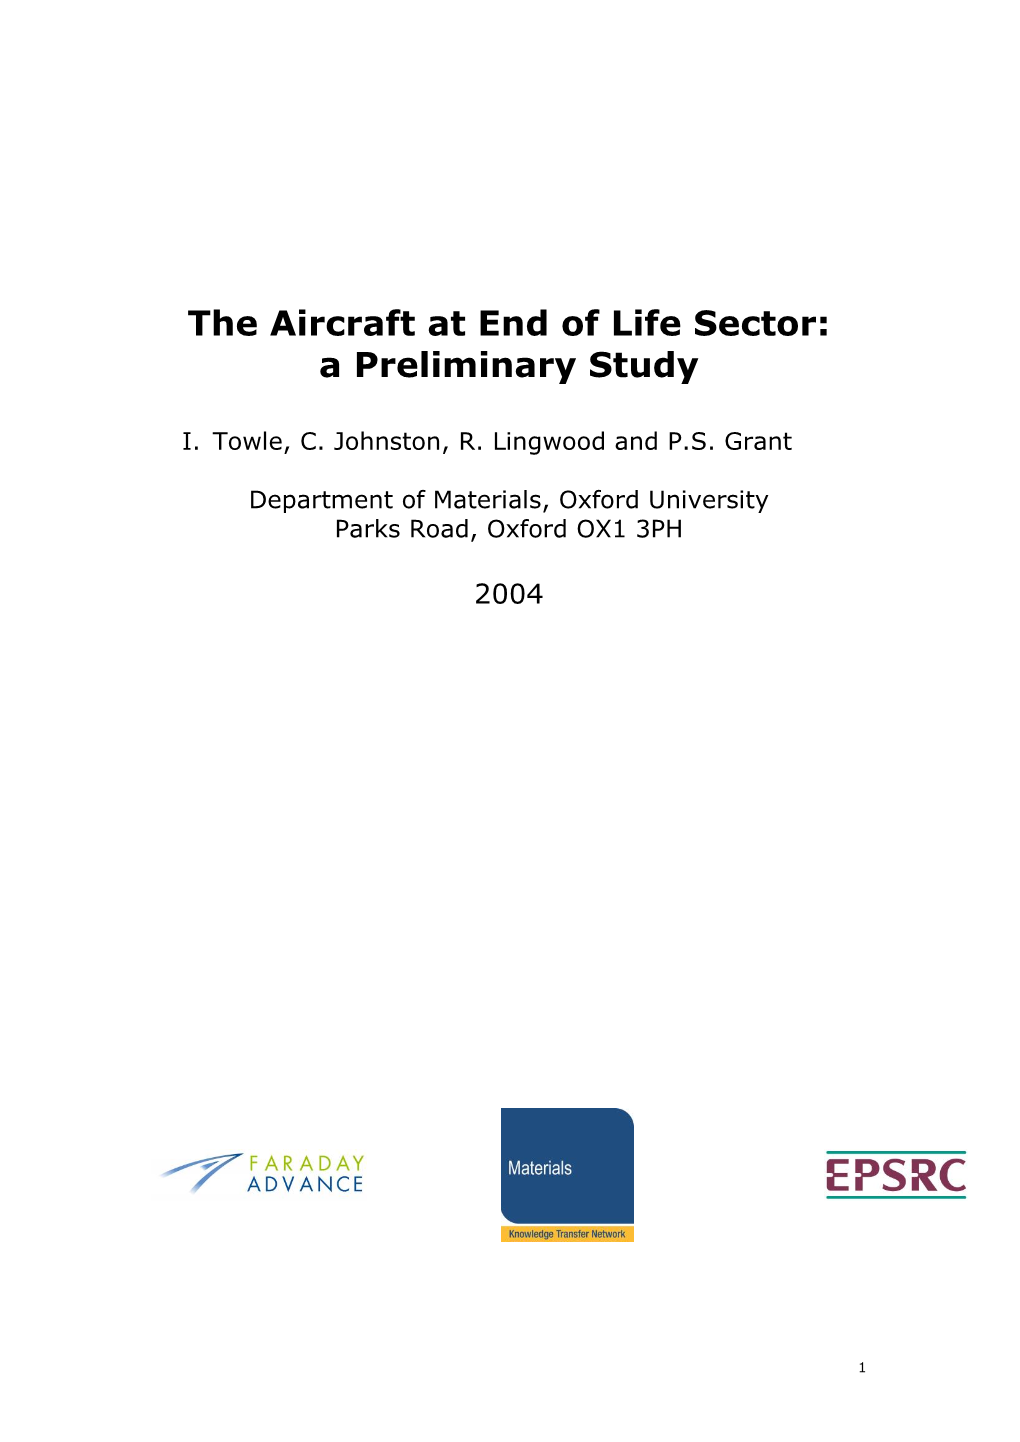 The Aircraft at End of Life Sector: a Preliminary Study